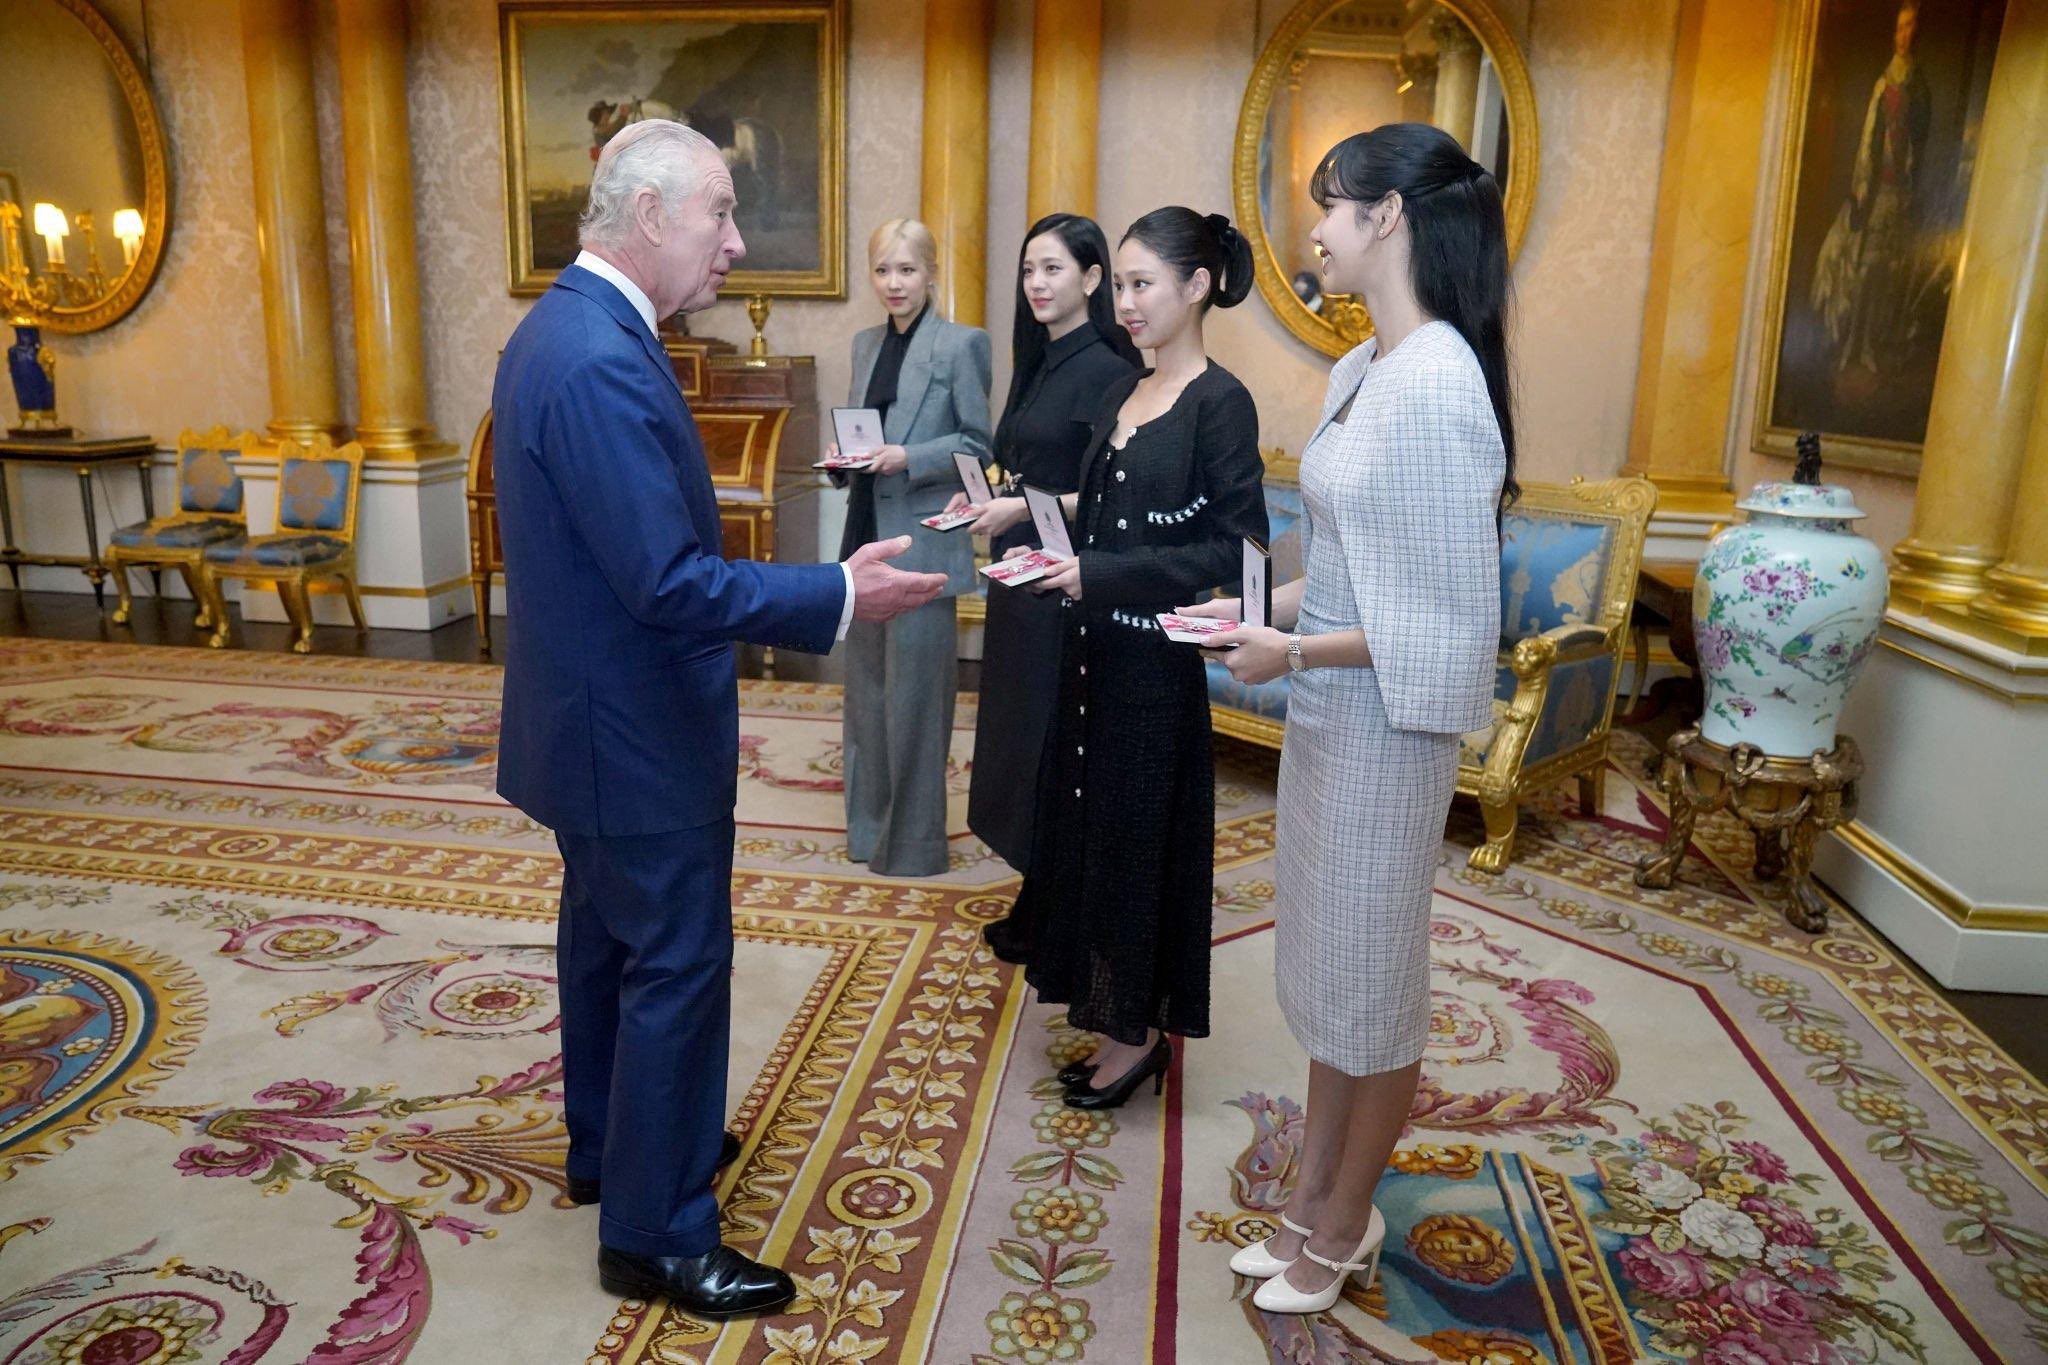 King Charles III chatted with the group at their investiture on Wednesday. AP